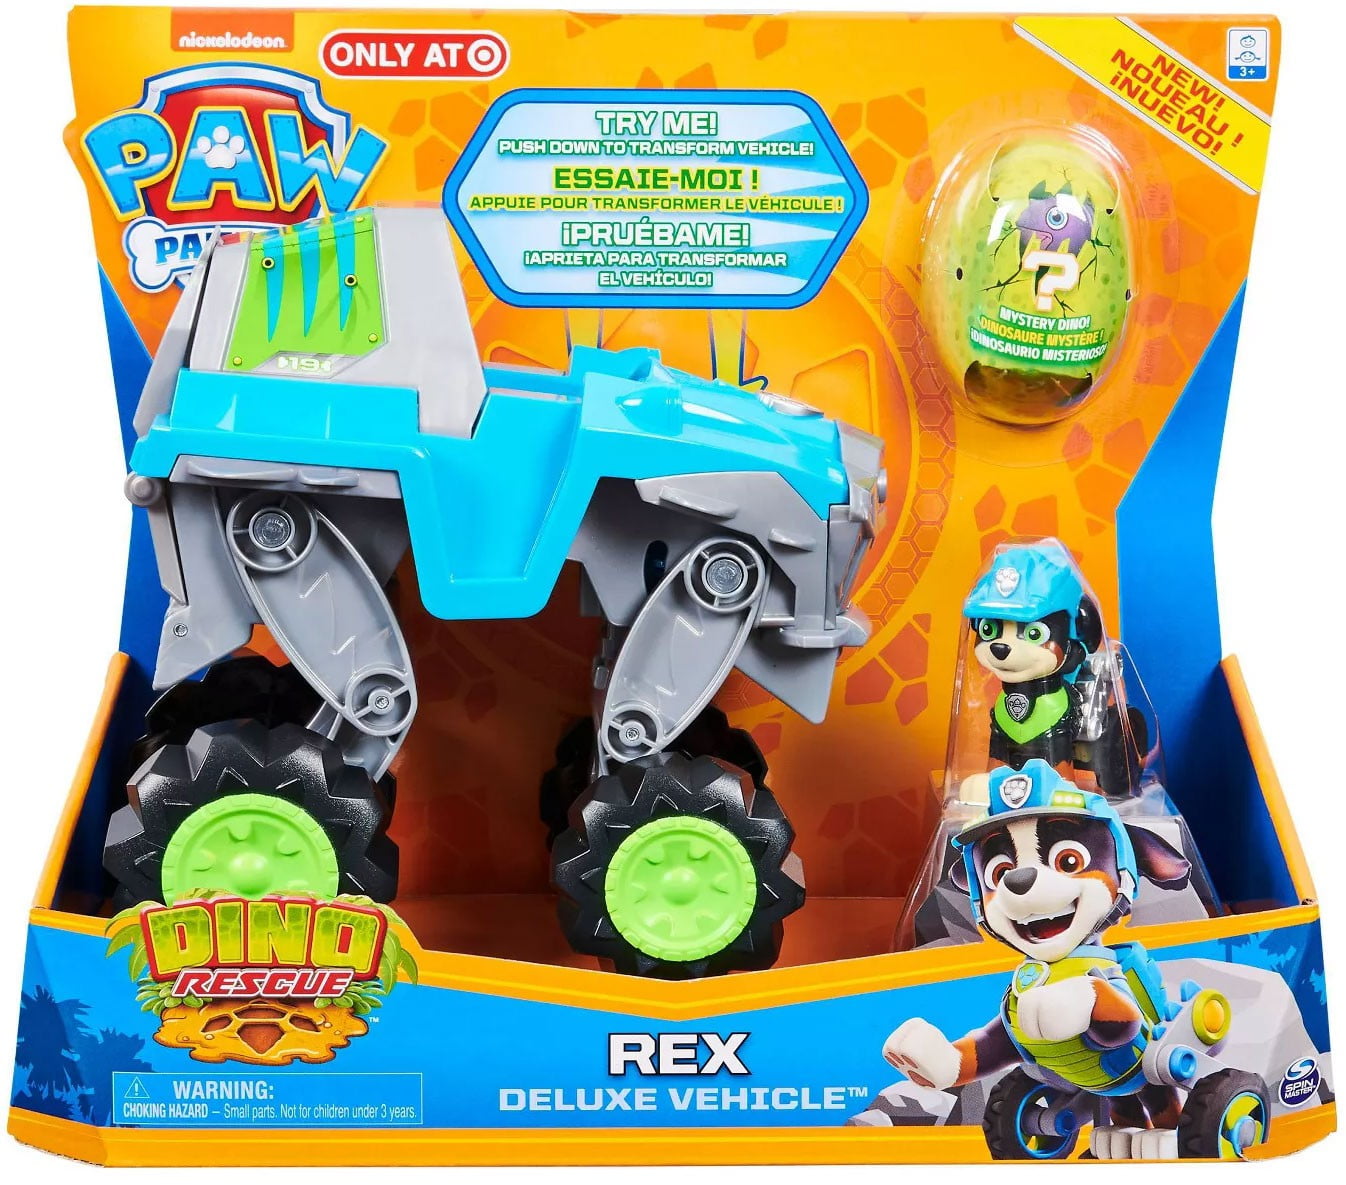 Paw Patrol DINO RESCUE REX Vehicle and Figure Playset Deluxe Exclusive 